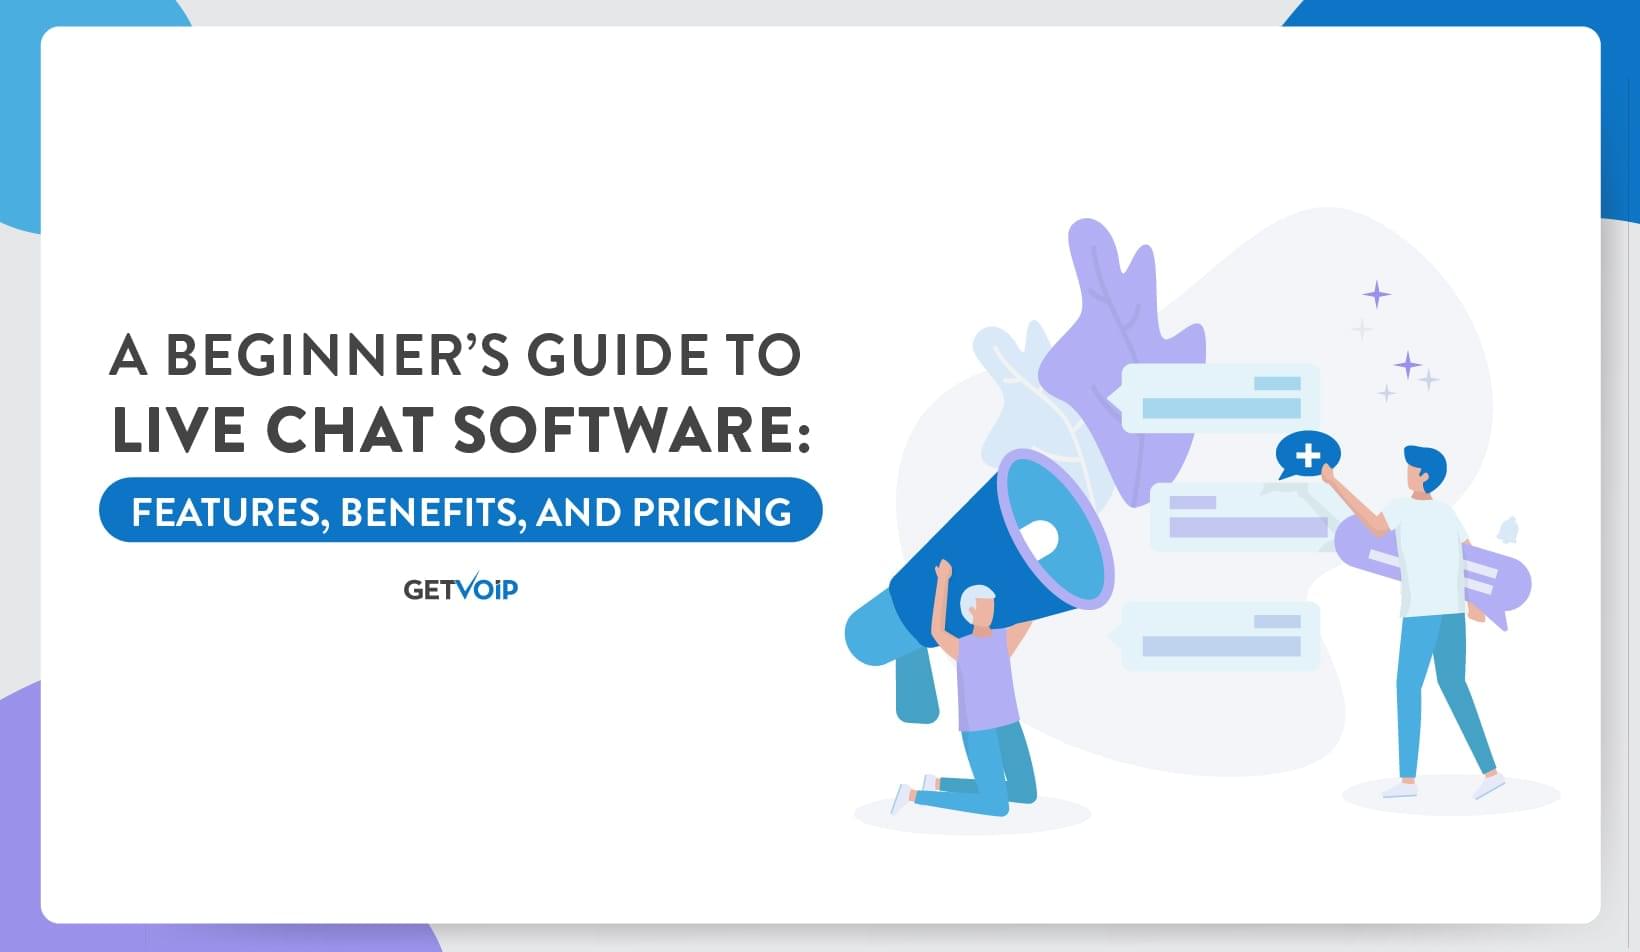 A Beginner’s Guide to Live Chat Software: Features, Benefits, and Pricing